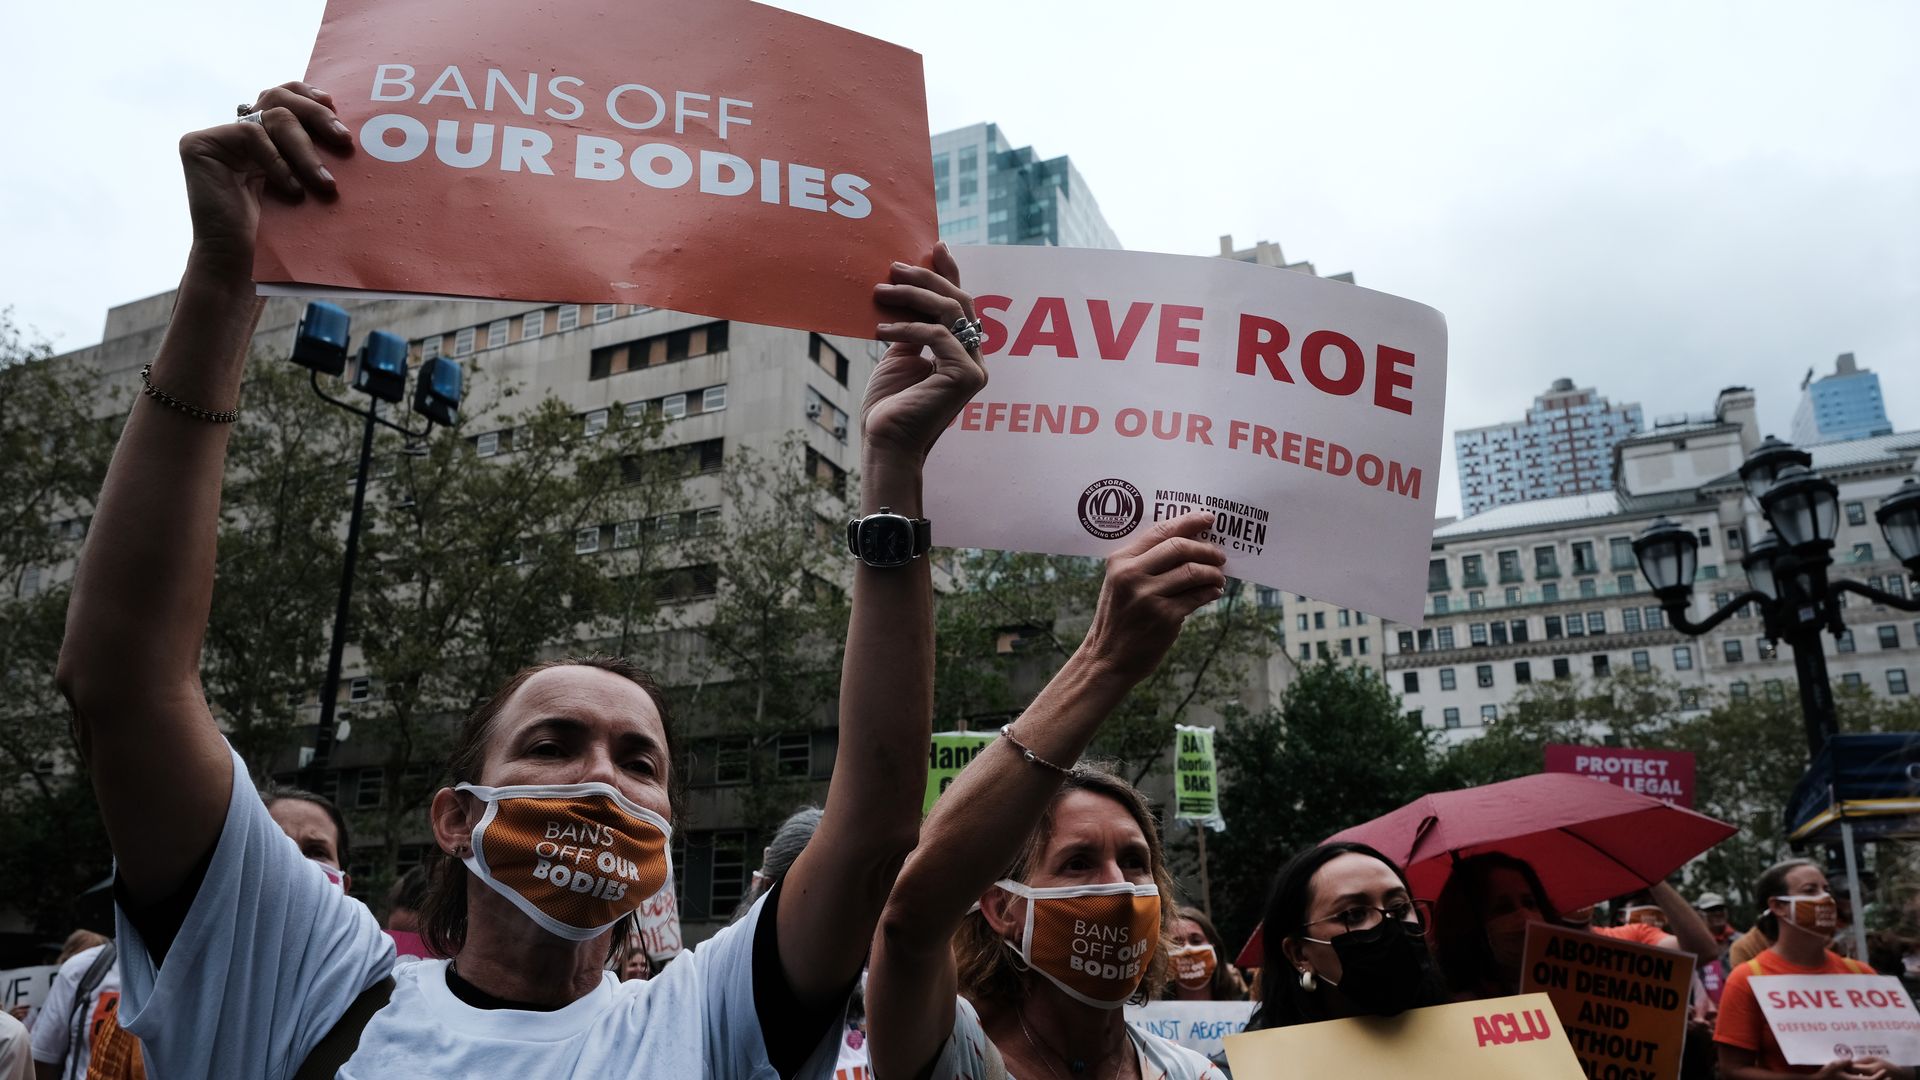 Photo of protesters holding signs that say "Save Roe" and "Bans off our bodies" 